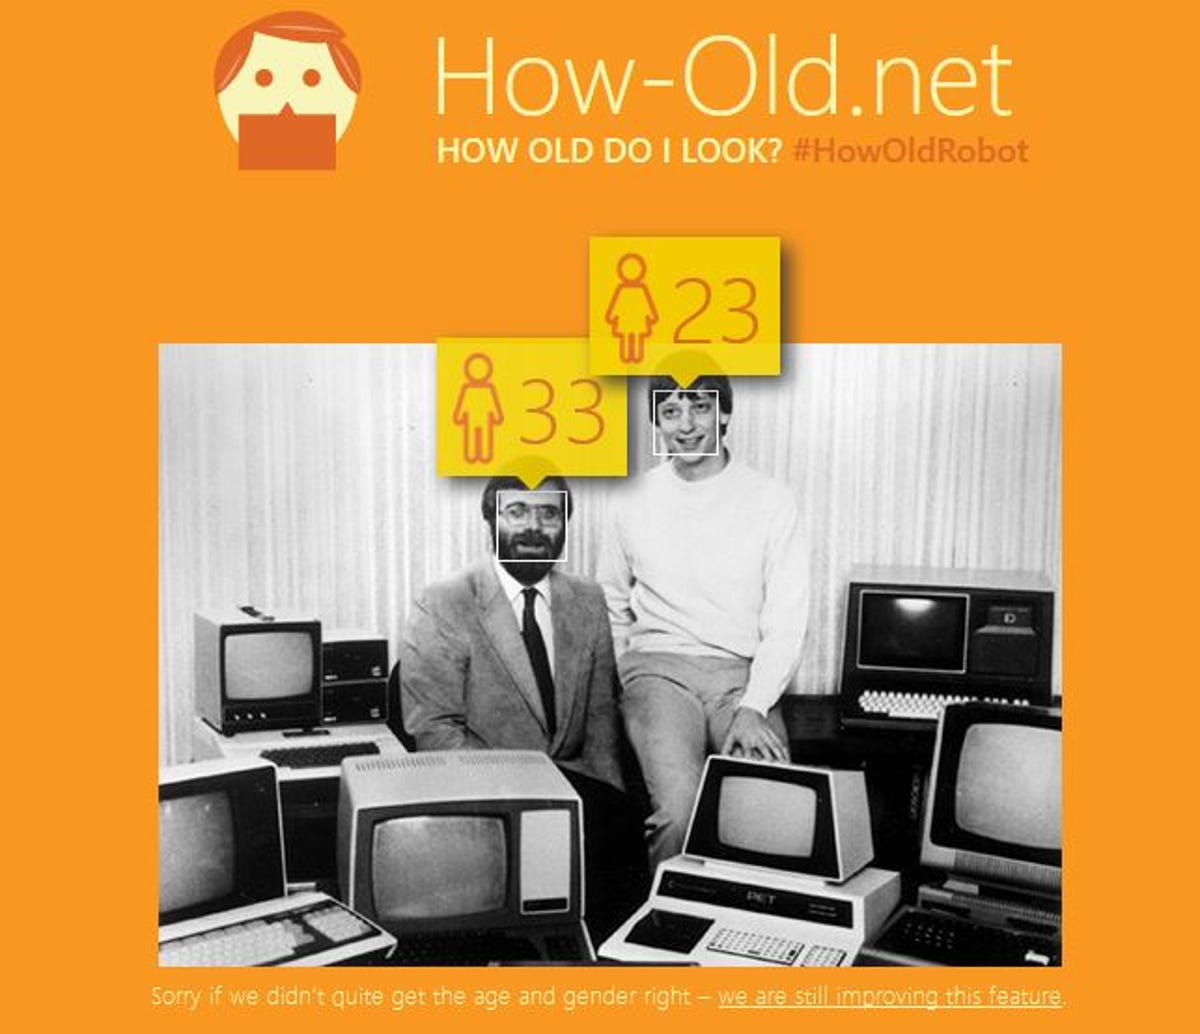 Paul Allen looks 33 while Bill Gates looks 23, says how-old.net